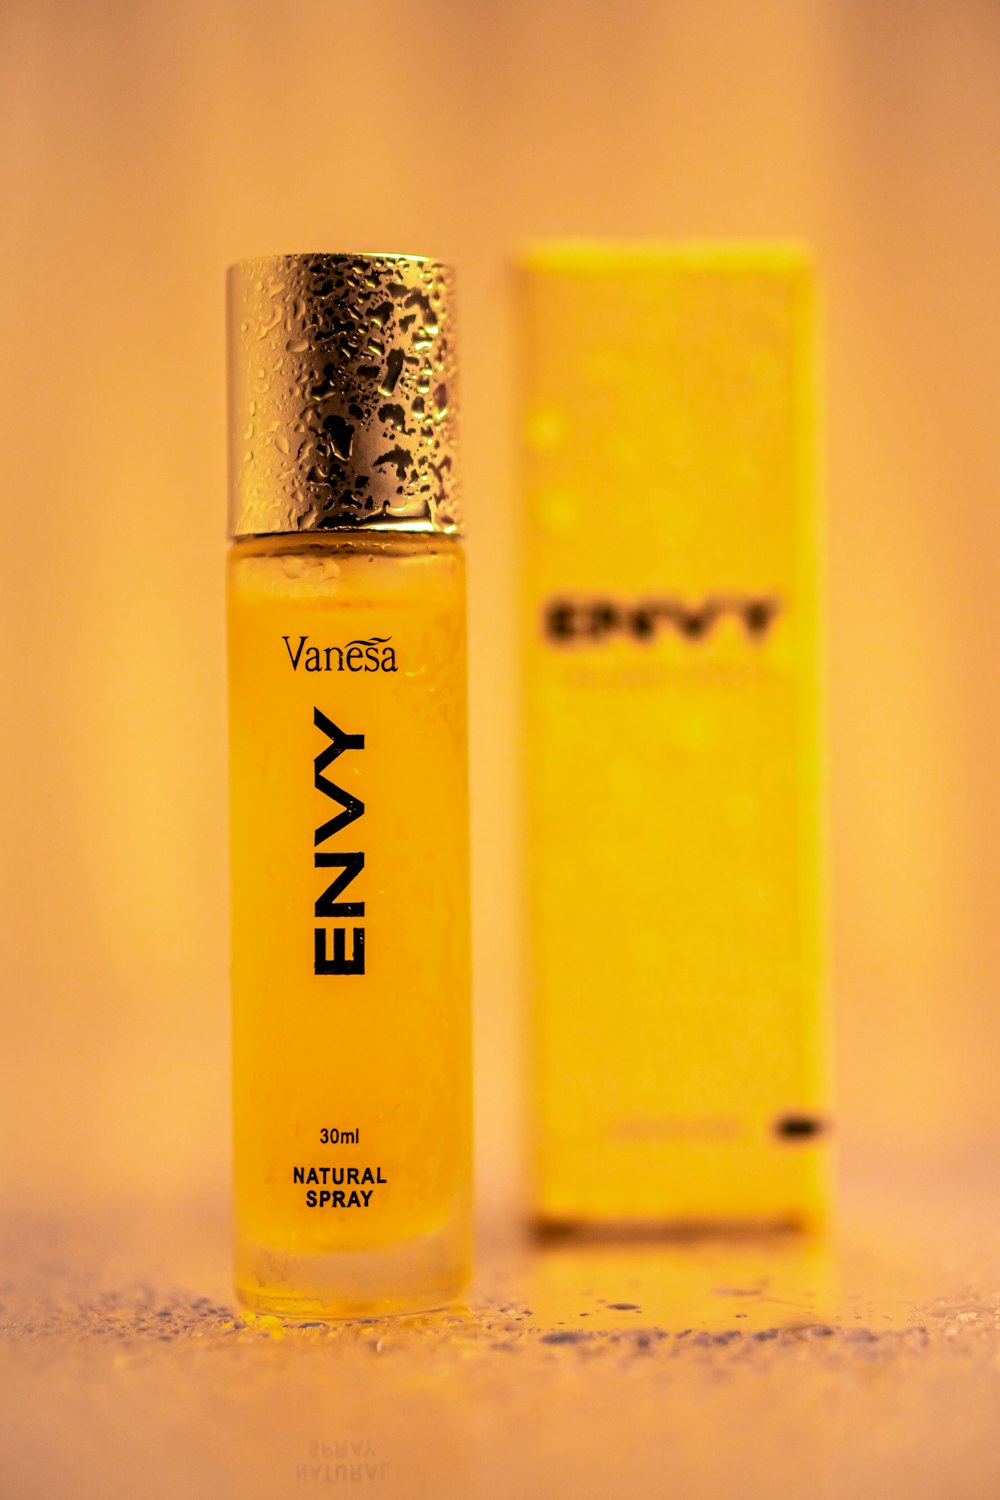 a bottle of envy next to a yellow box